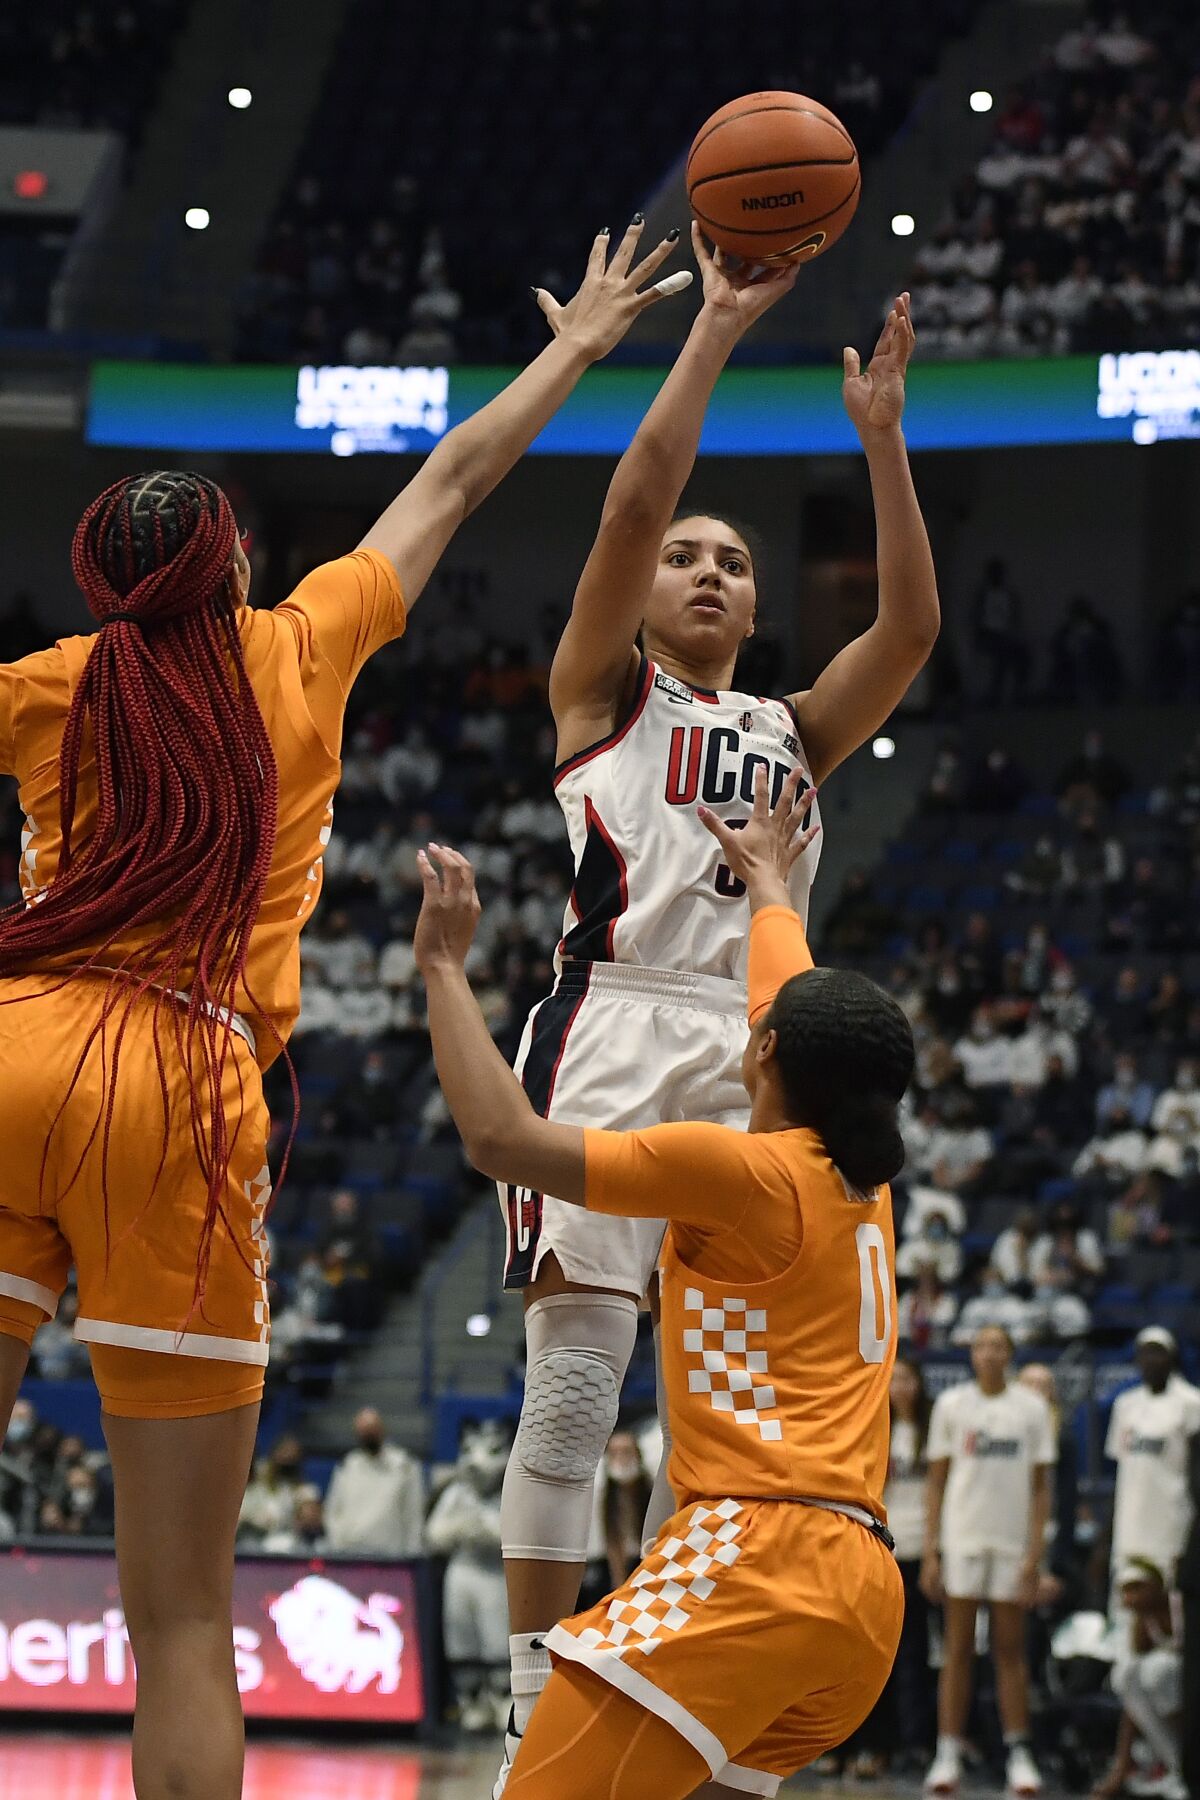 Connecticut's Azzi Fudd shoots over Tennessee's Tamari Key, left, and Tennessee's Brooklynn Miles, right, in the first half of an NCAA college basketball game, Sunday, Feb. 6, 2022, in Hartford, Conn. (AP Photo/Jessica Hill)